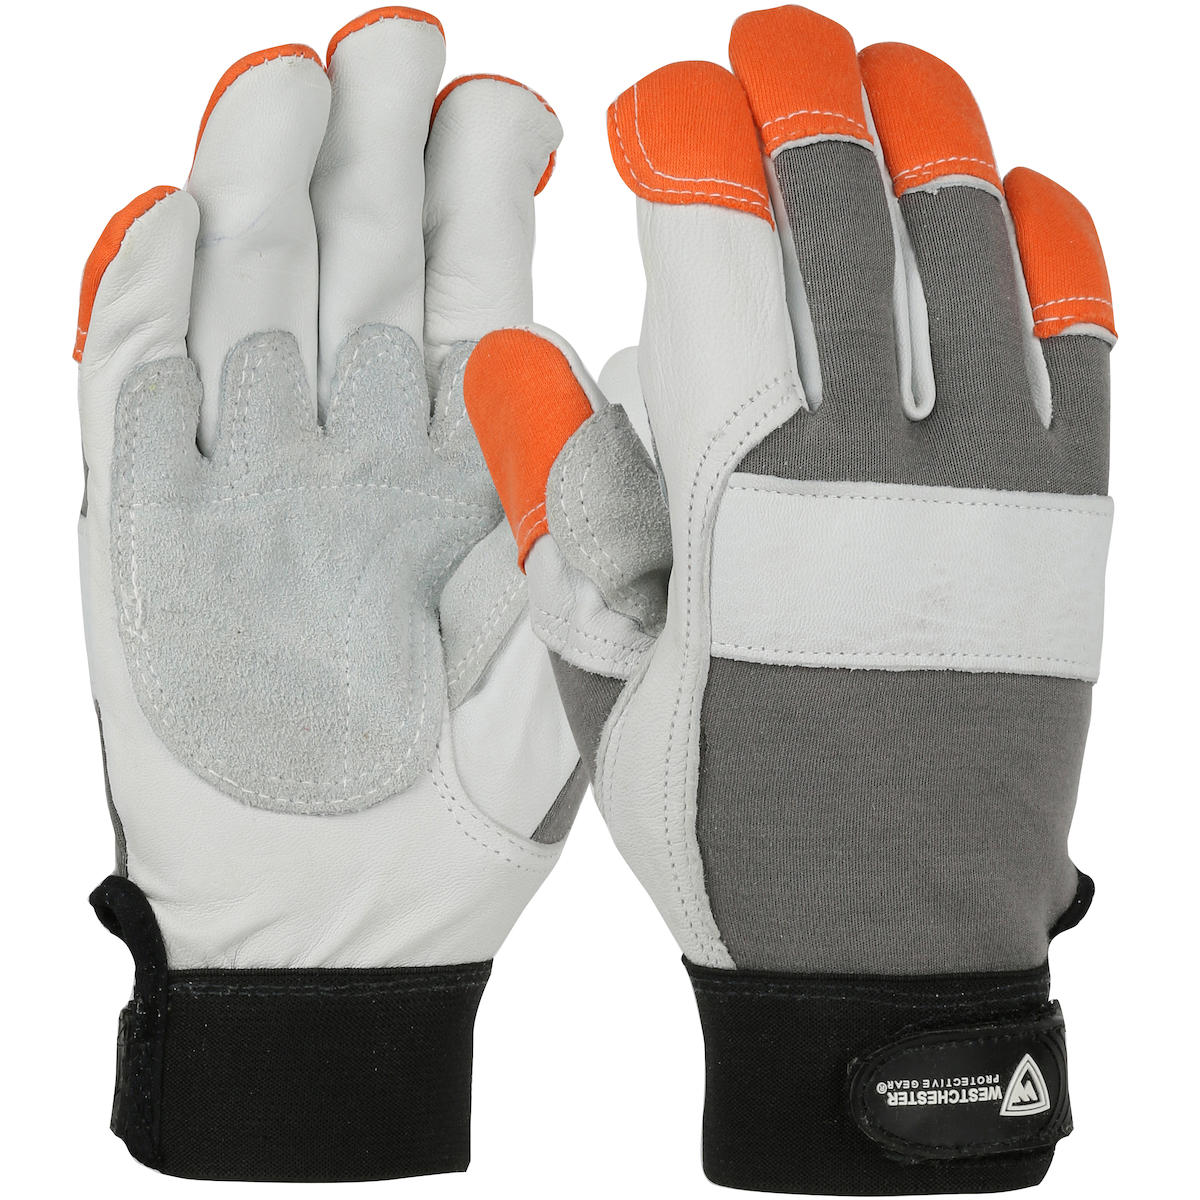 Boss® FR Goatskin Leather Glove with Split Cowhide Palm Patch and Nomex® Back - Spill Control